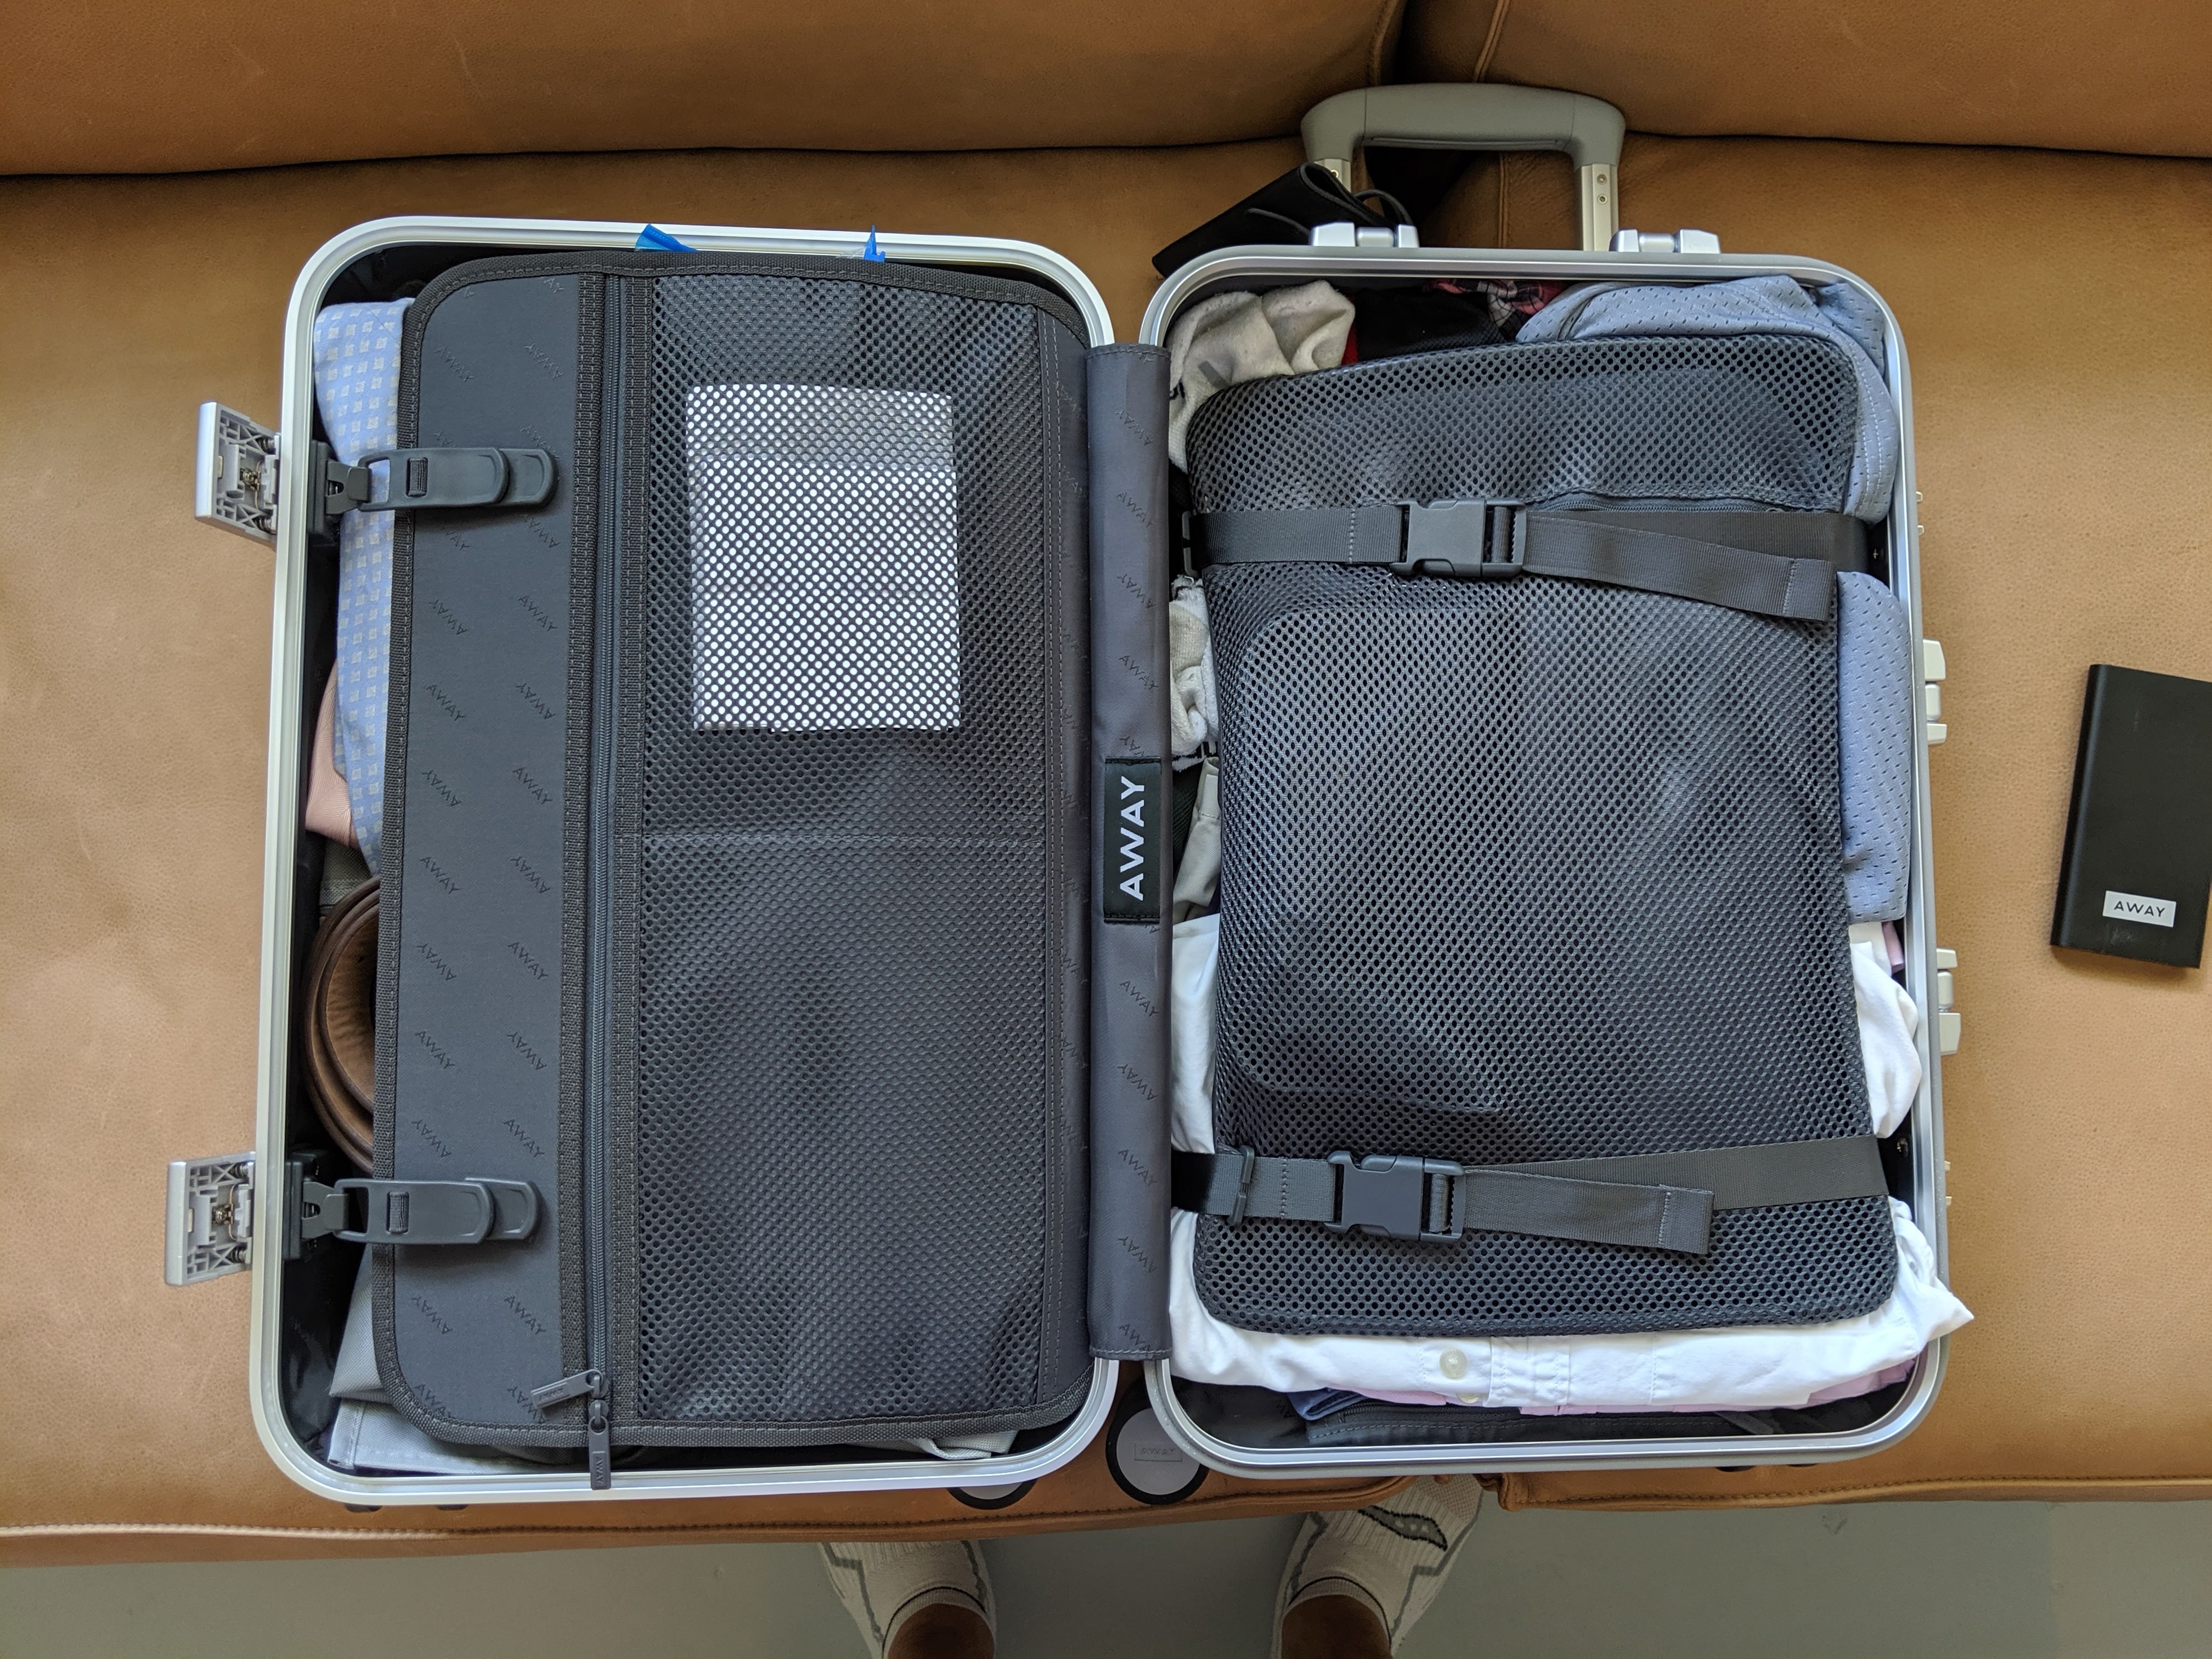 Review: Away's USB-powered Carry-On luggage helped me survive CES - 9to5Mac